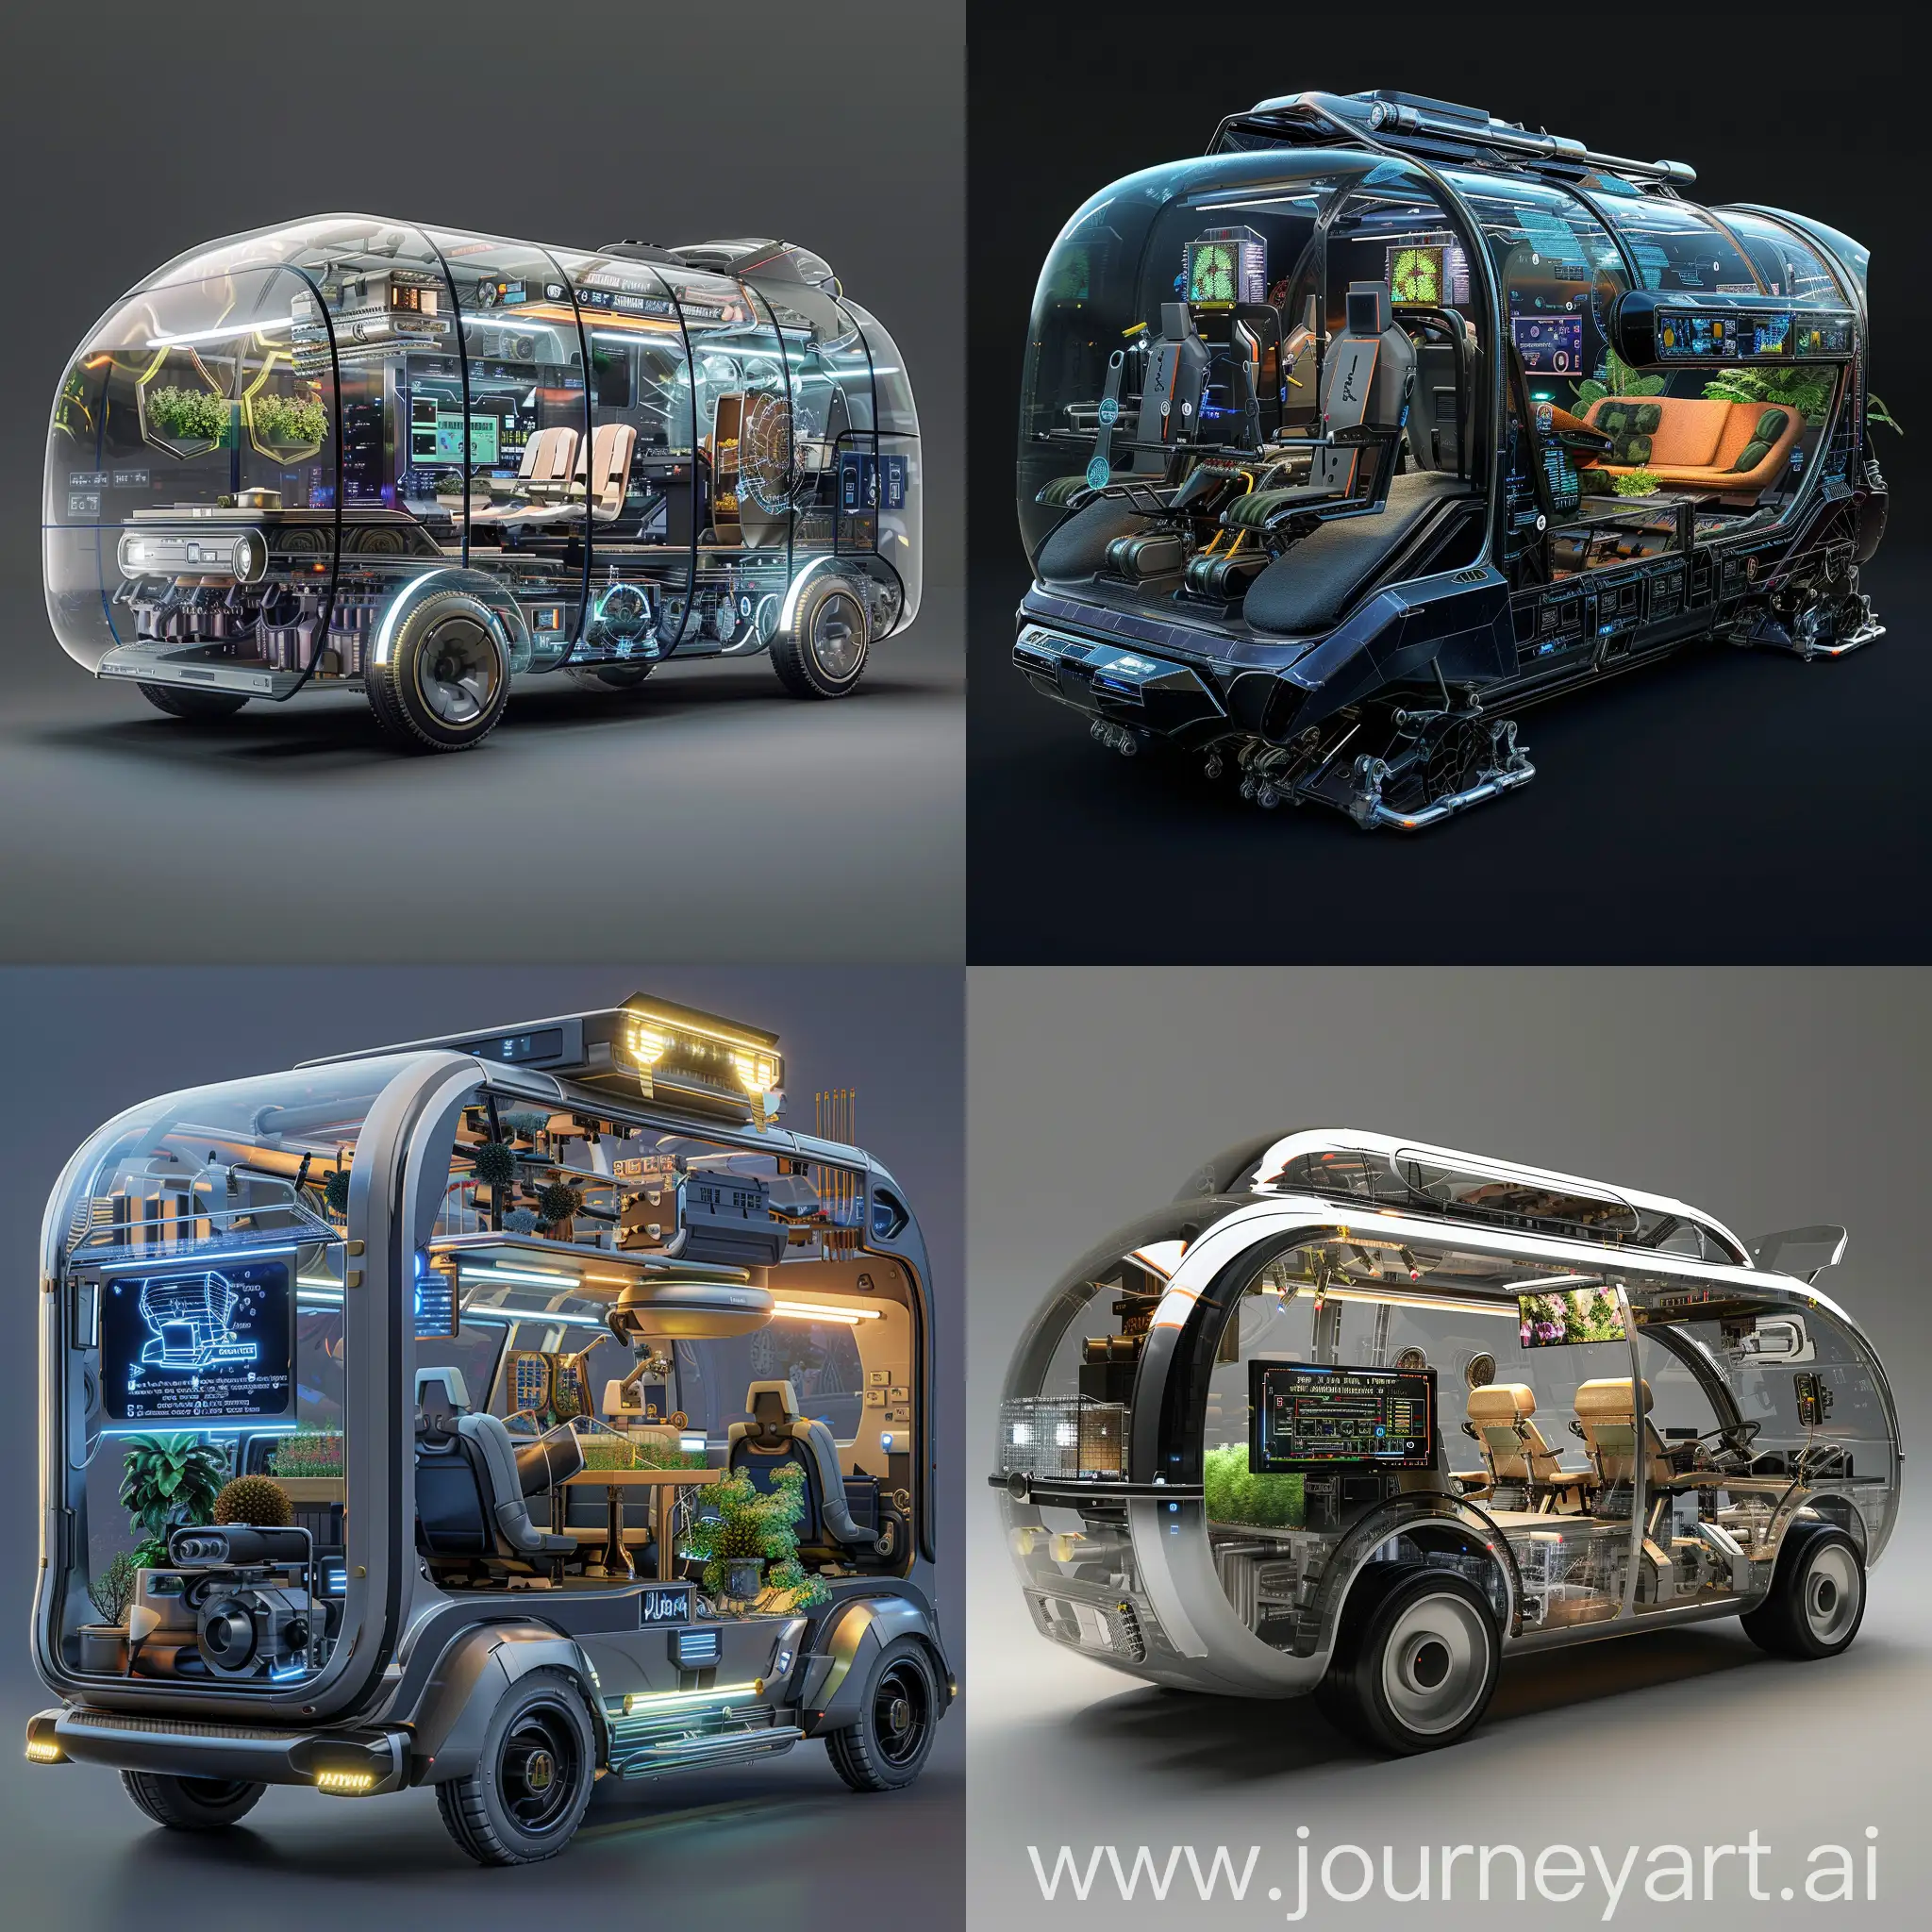 Futuristic microbus, Transparent Aluminum Frame (Star Trek), Modular Seating with Bio-Printers (Star Wars), Holographic Displays and AI Assistant (Her), Self-Healing Materials (Terminator 2), Zero-Gravity Recliner (WALL-E), Nanobot Air Purification (The Expanse), Kinetic Energy Harvesting (Ready Player One), Robotic Chef and Mini-Greenhouse (Elysium), VR Entertainment Room (The Matrix), Morphing Interior (Transformers), Aerodynamic Bodylines (Cyberpunk 2077), Wheeled Legs and Climbing Tracks (Horizon Zero Dawn), Kinetic Energy Wings (Firefly), Adaptive Camouflage (Halo), Underglow Navigation Lights (Tron), Retractable Landing Gear and Drone Launchers (Ghost in the Shell), Self-Repairing Hull (Gundam), Holographic Signage and Passenger Information (Akira), Modular Cargo Pods (No Man's Sky), Transparent Solar Roof (Jetsons), unreal engine 5 --stylize 1000